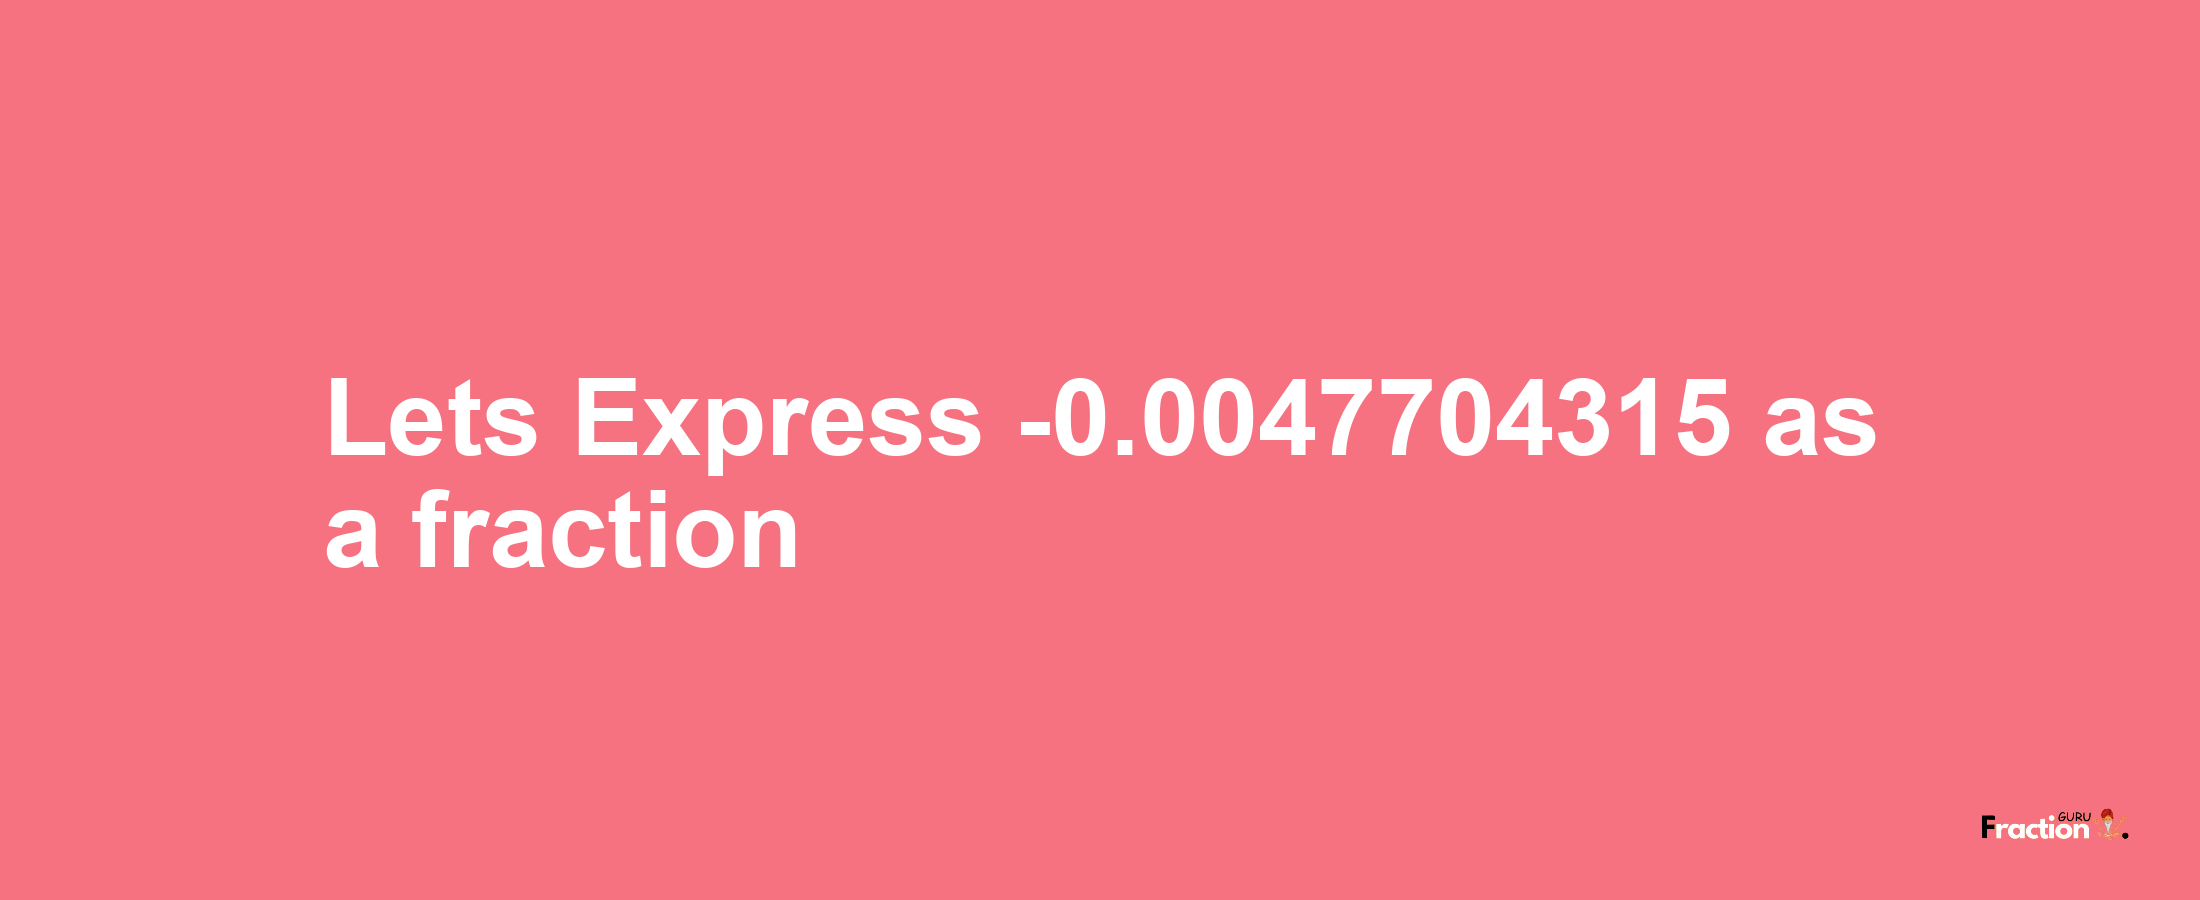 Lets Express -0.0047704315 as afraction